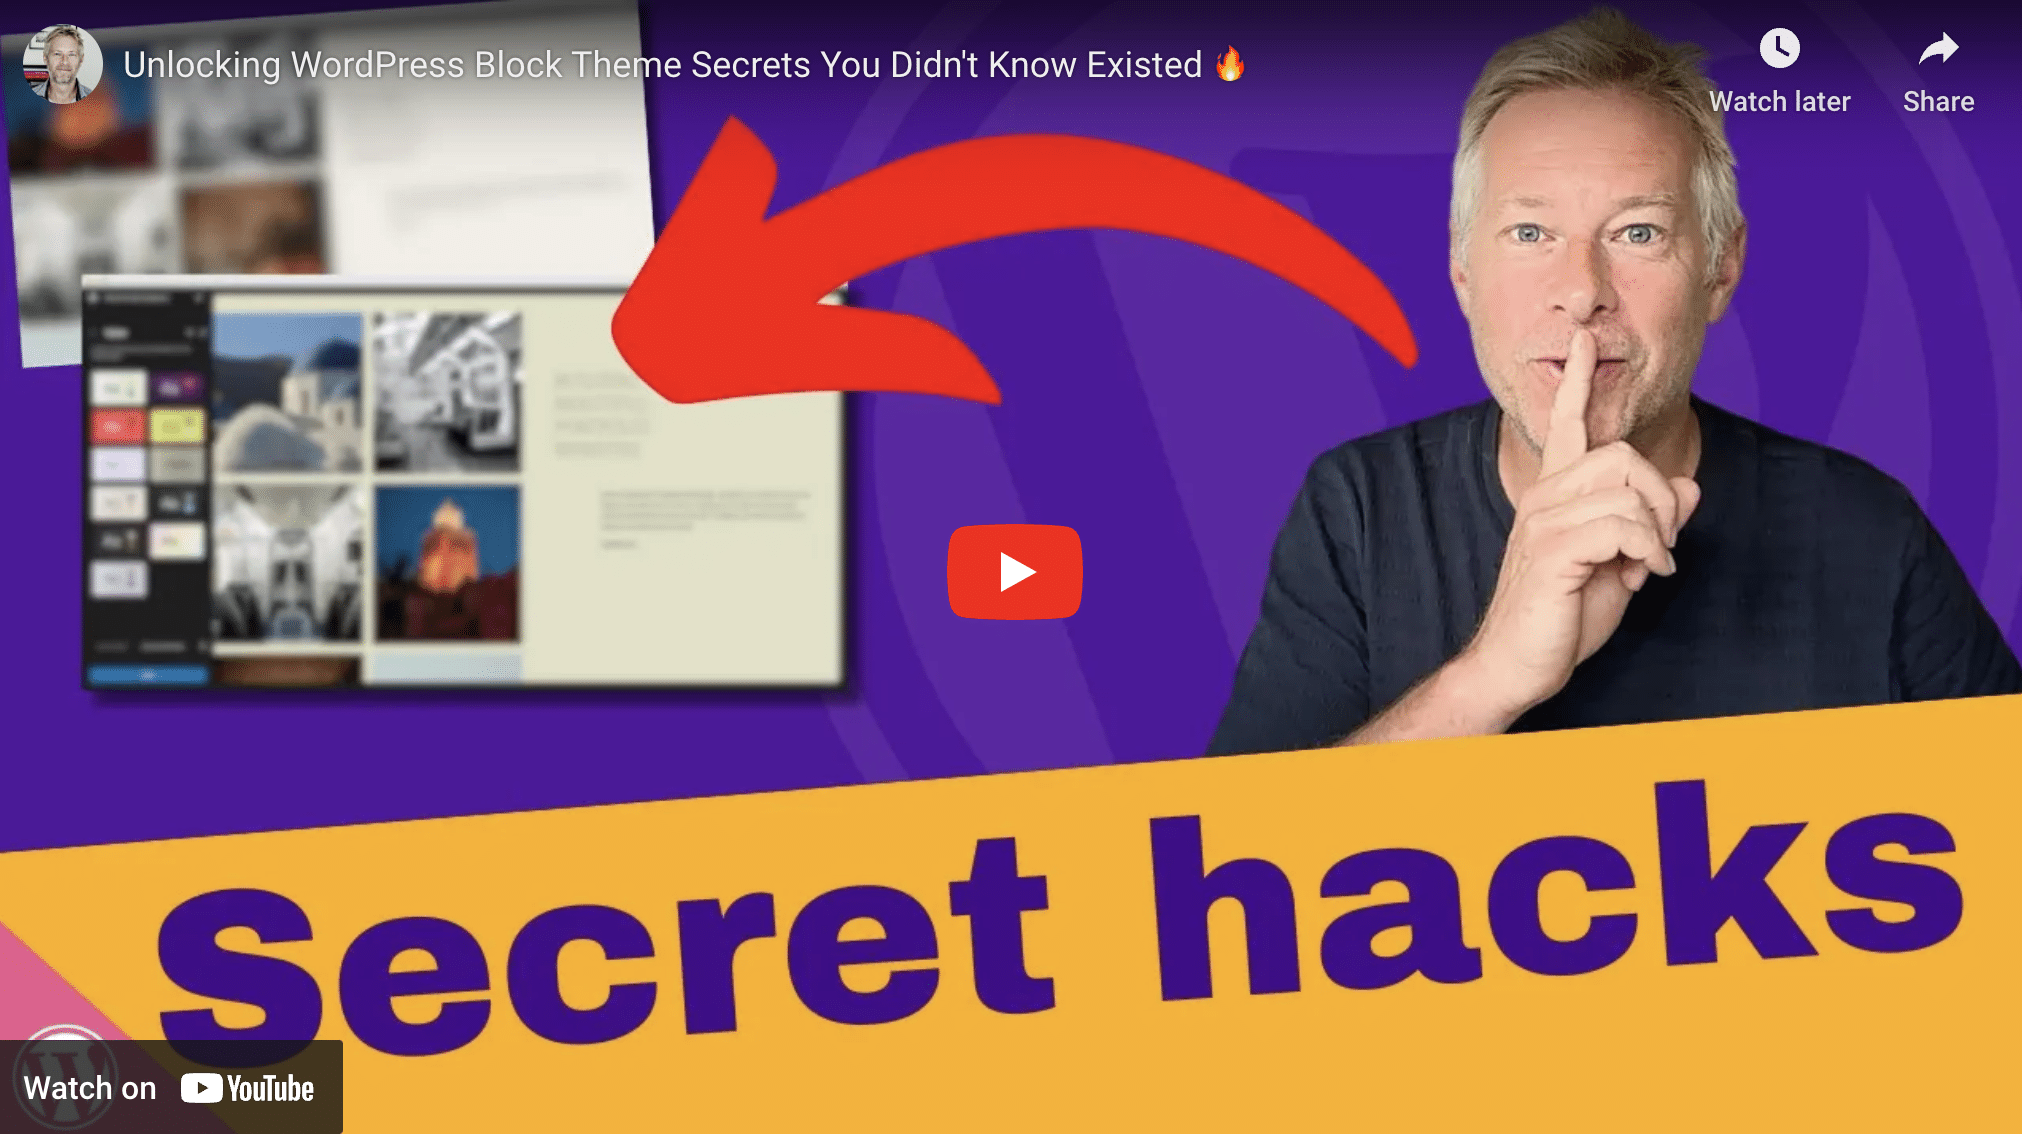 Unlocking WordPress Block Theme Secrets You Didn’t Know Existed 🔥